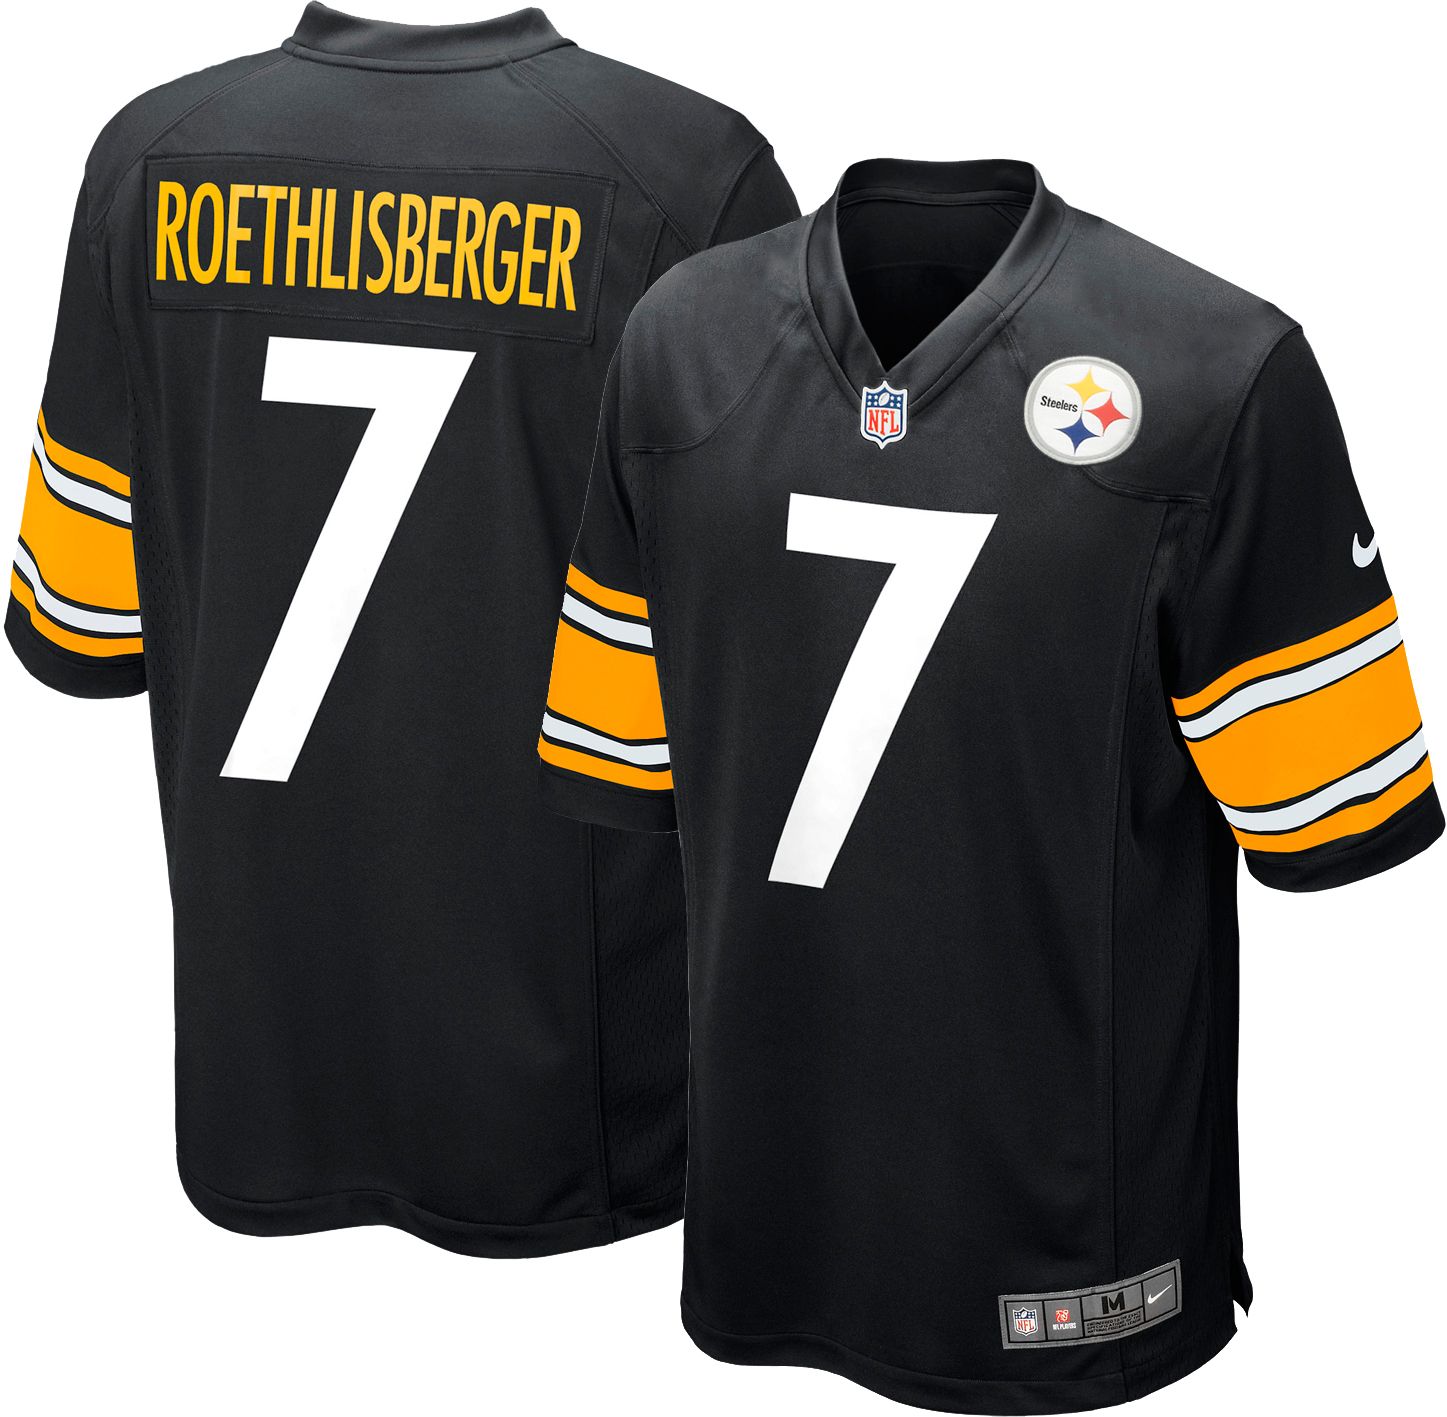 ryan shazier jersey color rush